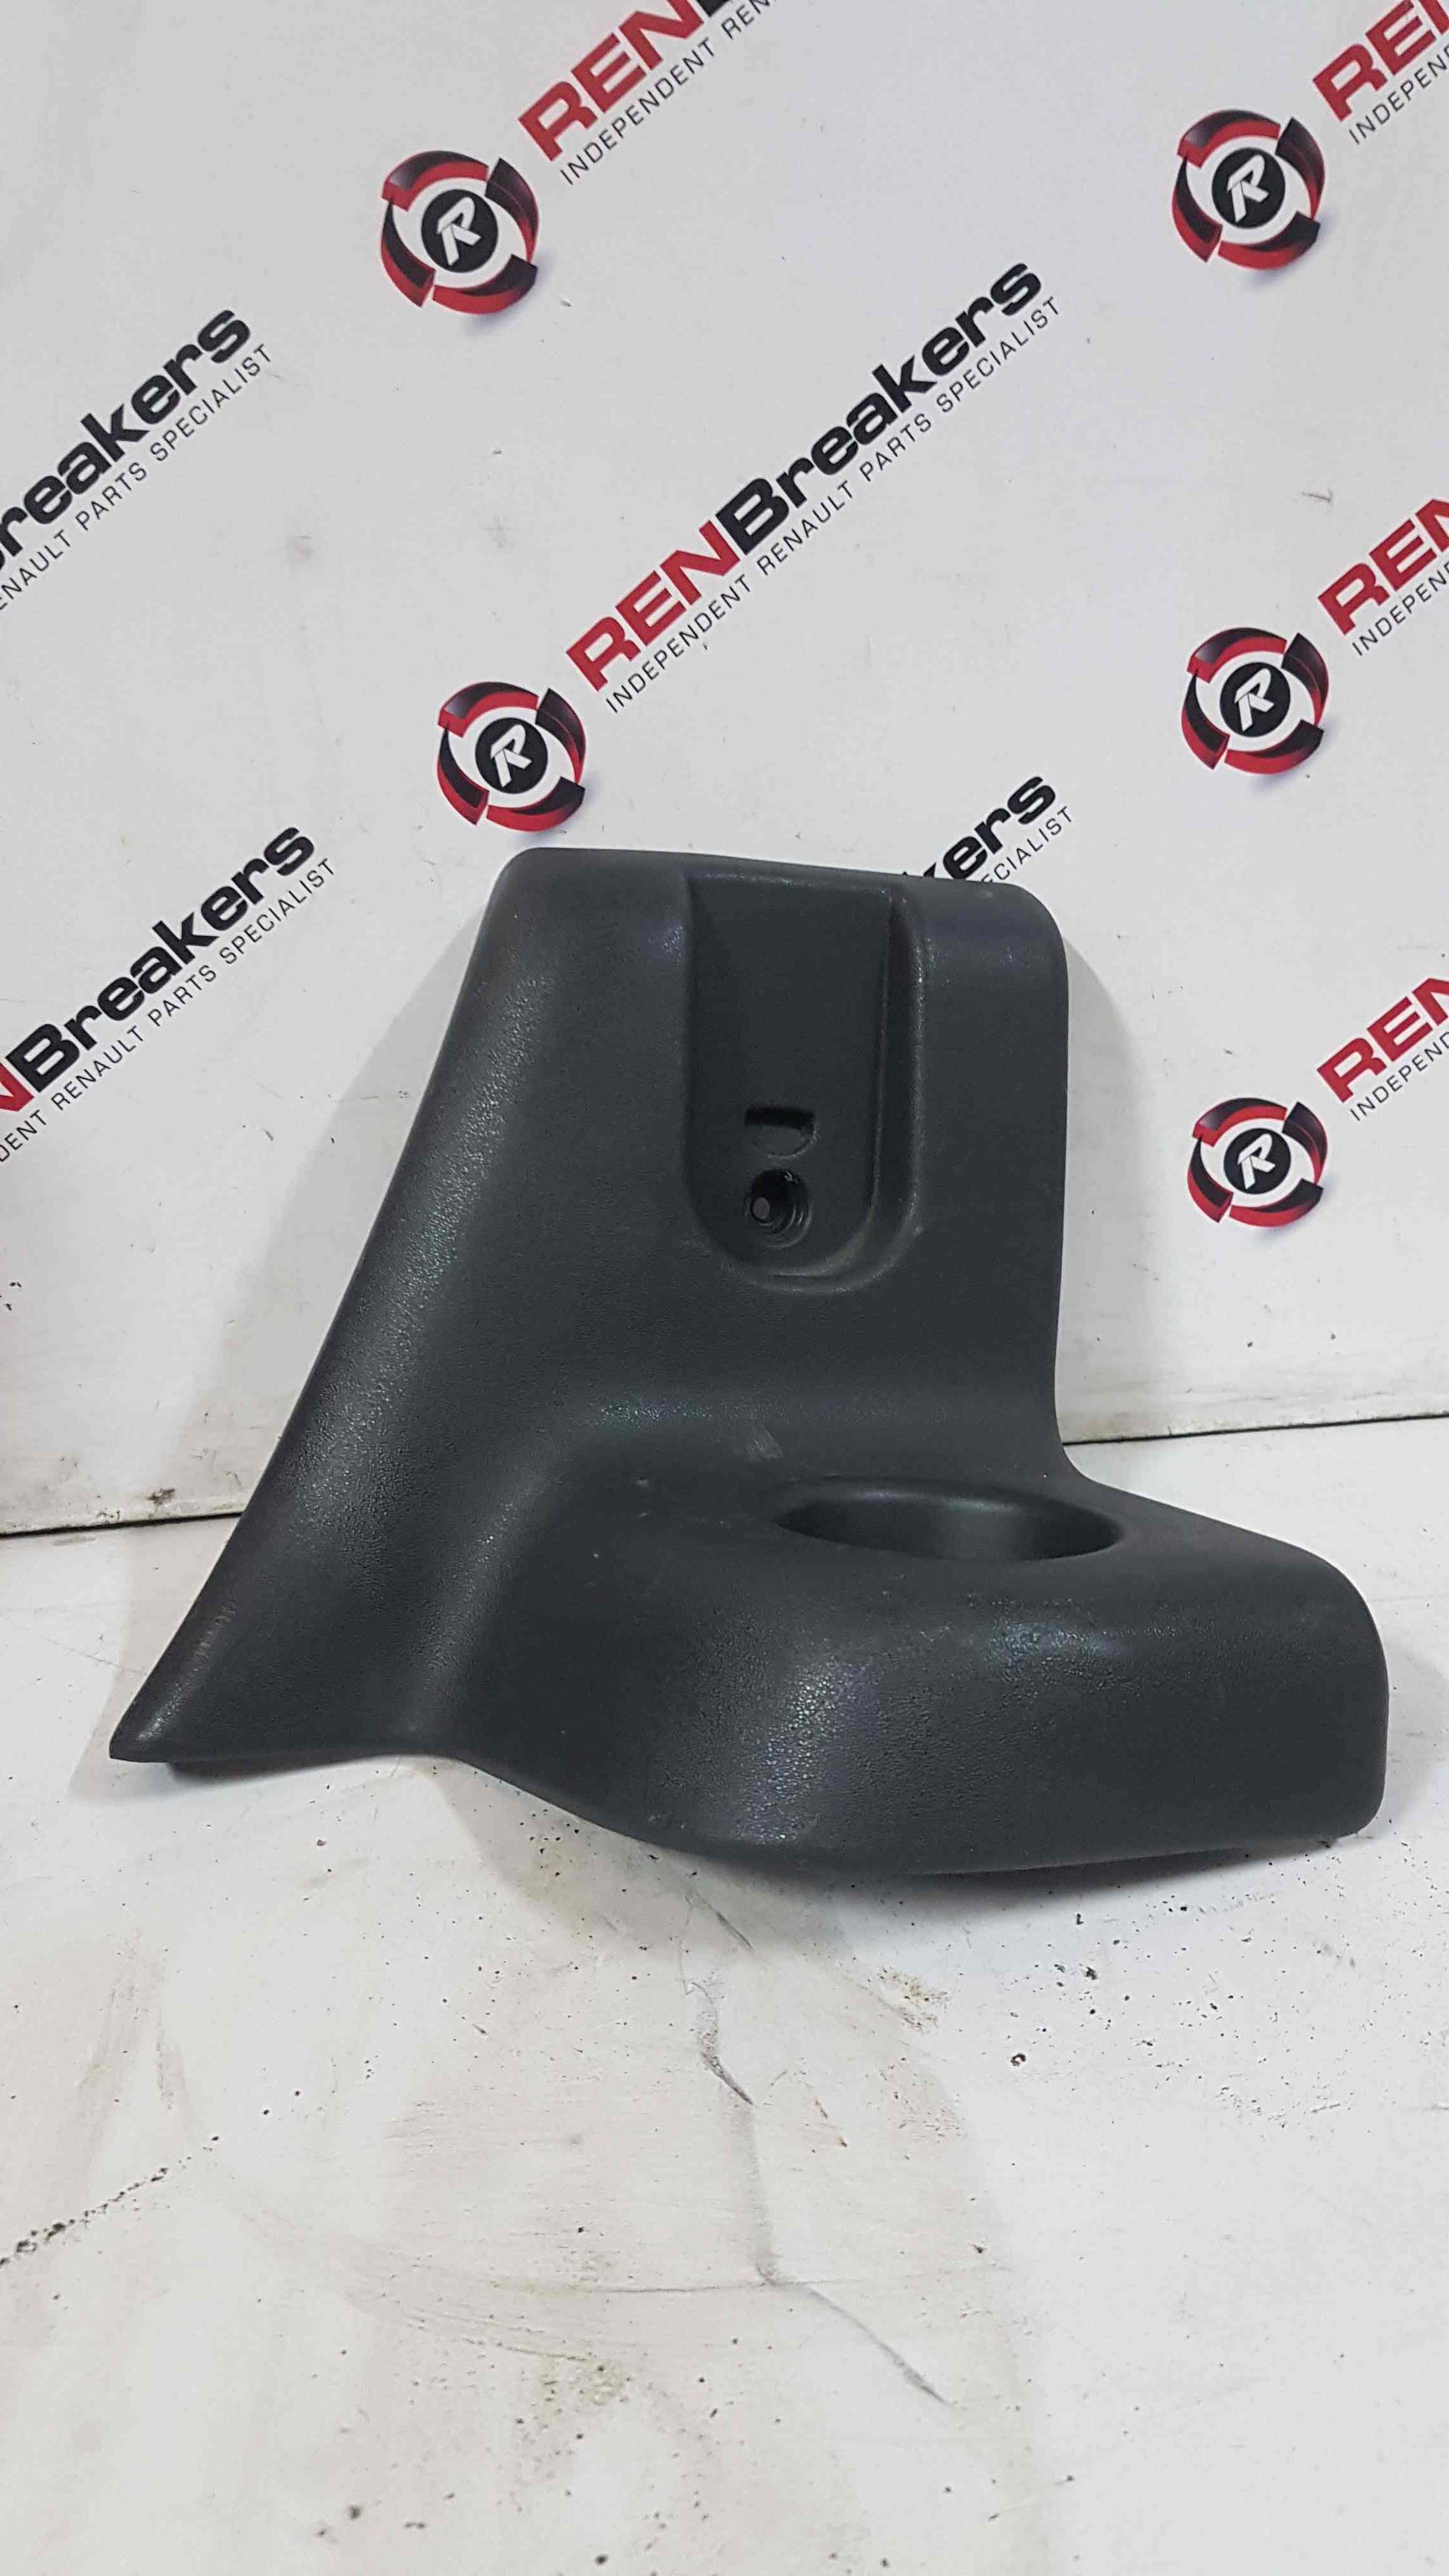 Renault Grand Espace 2003-2013 Driver OSR Rear CUP Holder  8200074505